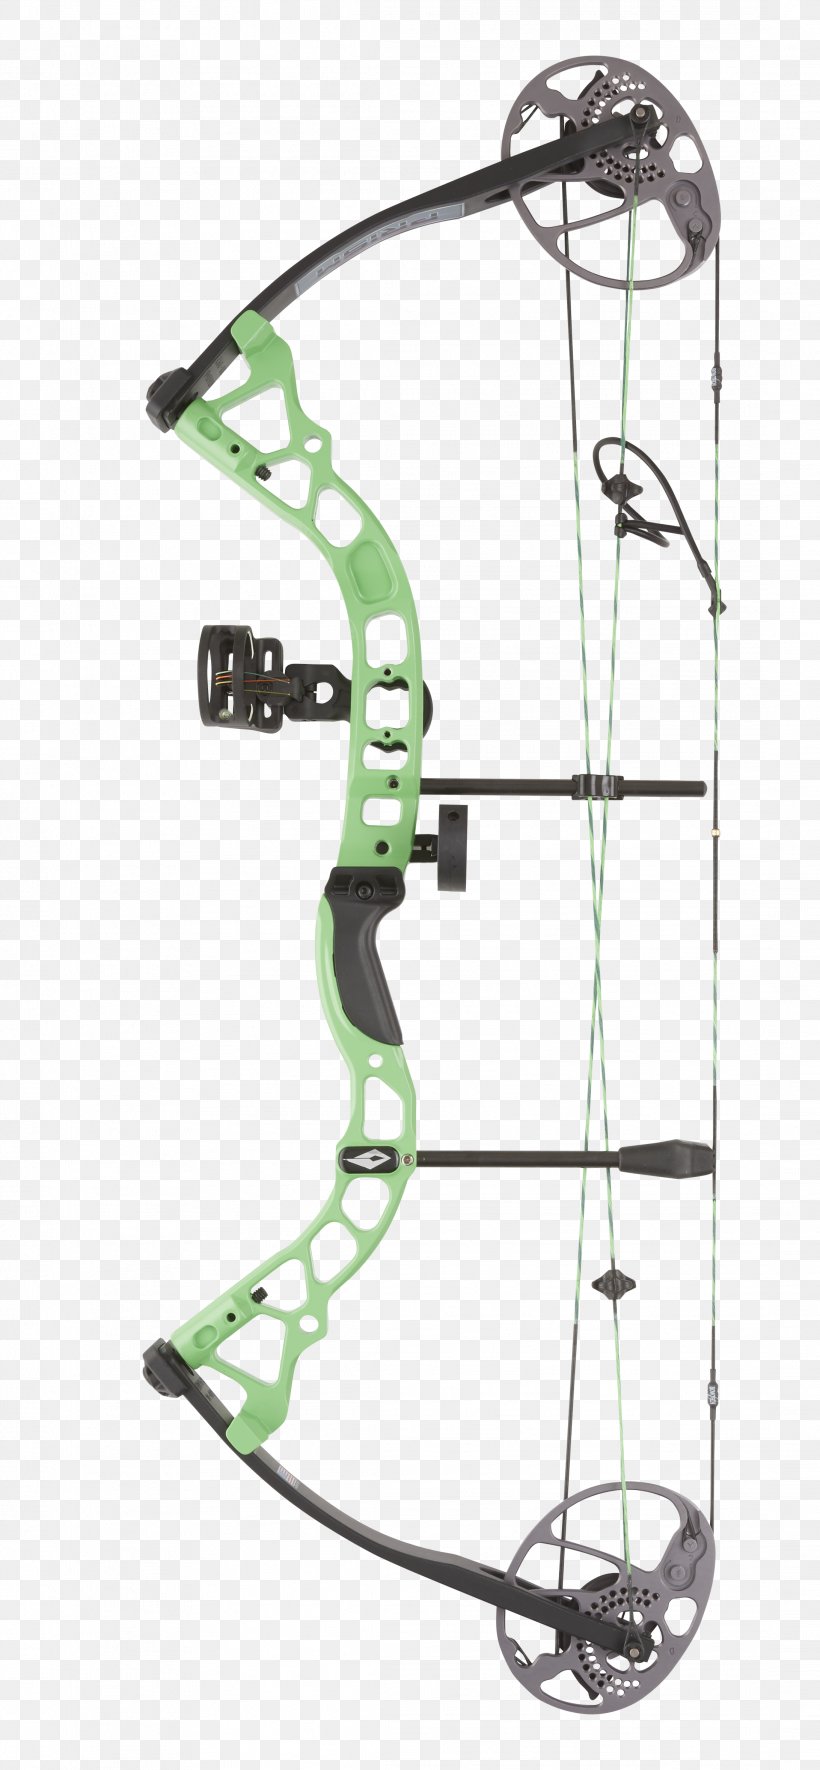 Bow And Arrow Compound Bows Archery Diamond, PNG, 2184x4716px, Bow And Arrow, Archery, Bit, Bow, Compound Bow Download Free